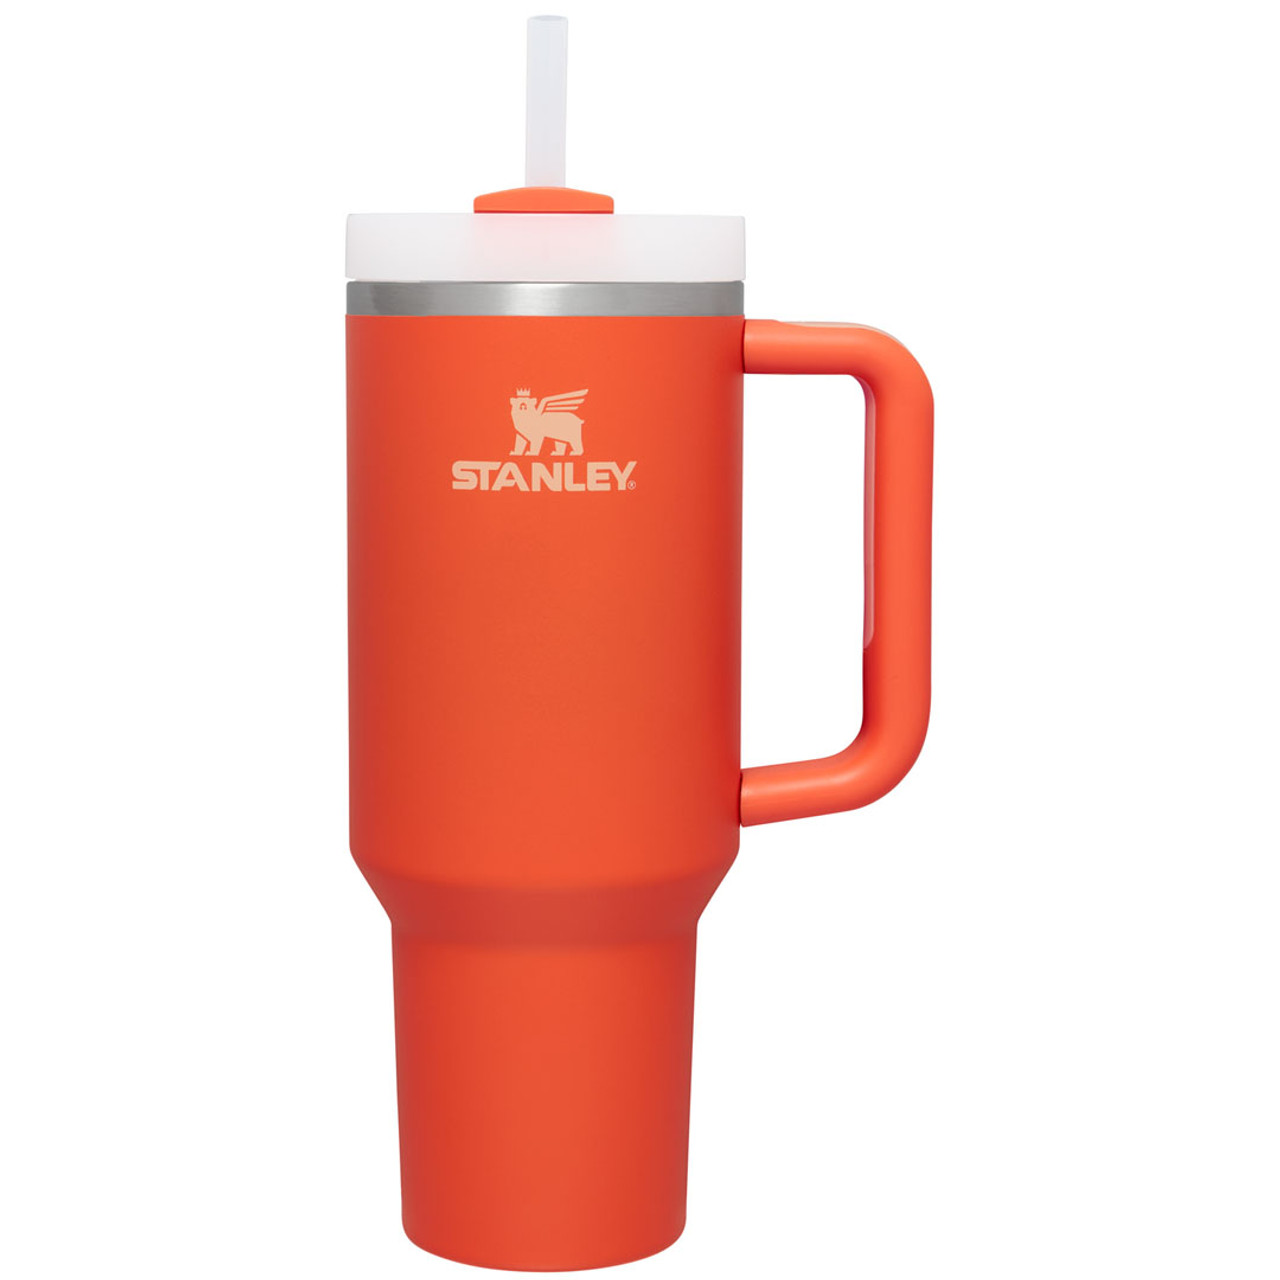 https://cdn11.bigcommerce.com/s-ppsyskcavg/images/stencil/1280x1280/products/68701/248256/B2B_Web_PNG-The-Quencher-H2-O-FlowState-Tumbler-40OZ-The-Quencher-H2-O-FlowState-Tumbler-40OZ-Tigerlily-Front__68870.1700148050.jpg?c=2?imbypass=on